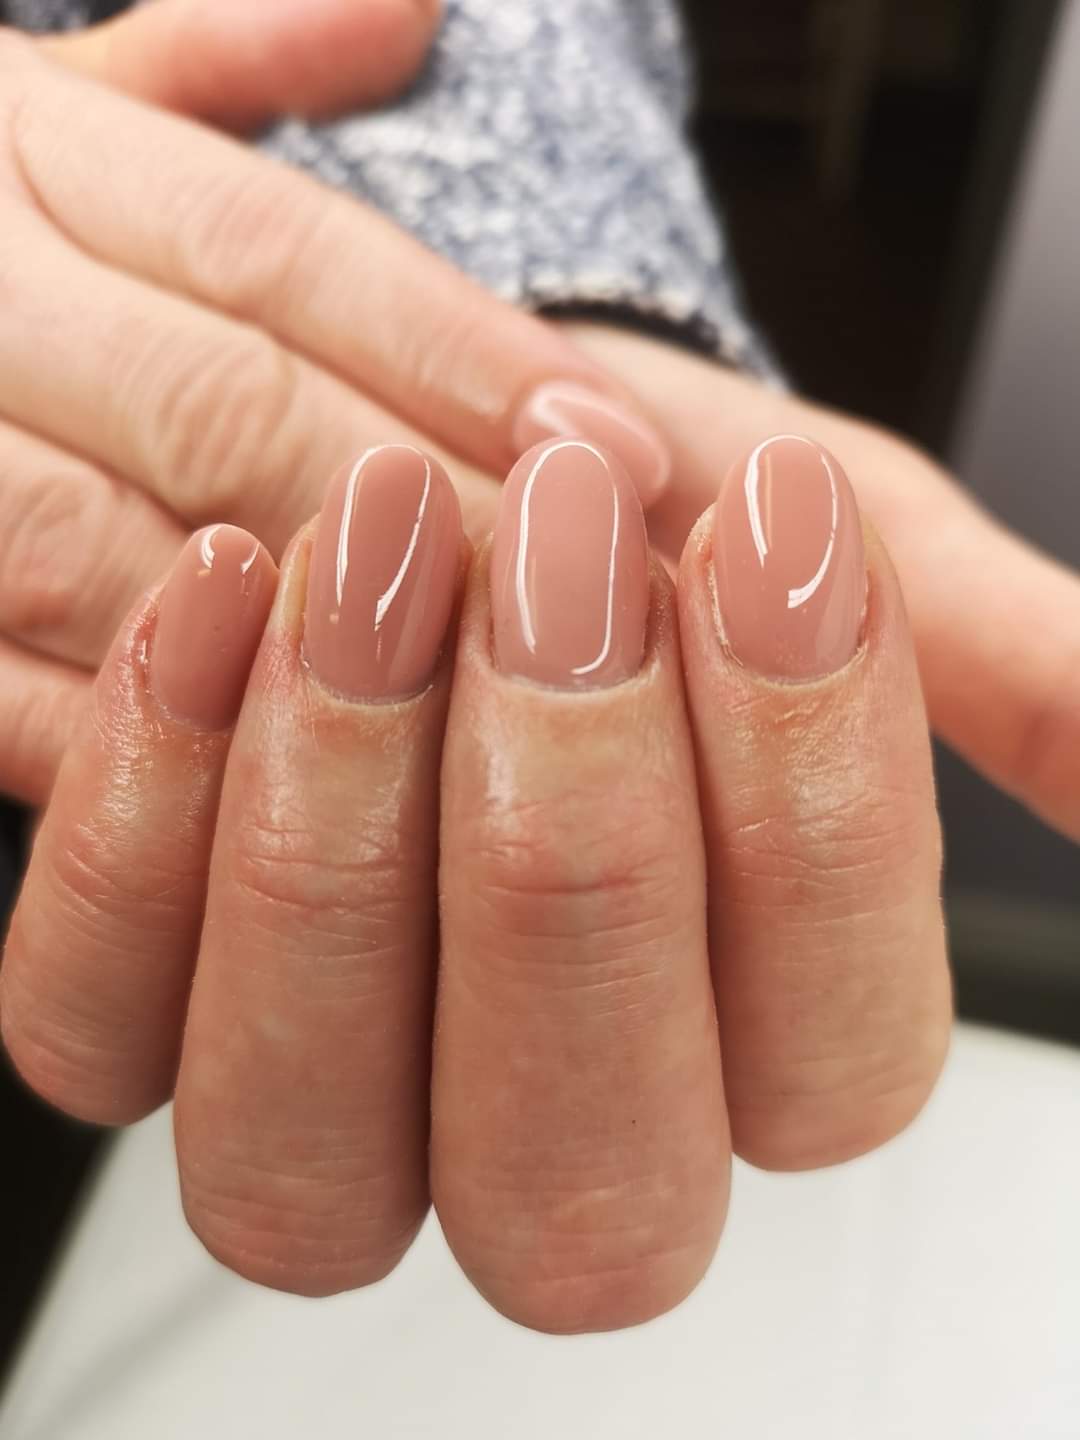 What can for my weak nails? Little Luxury